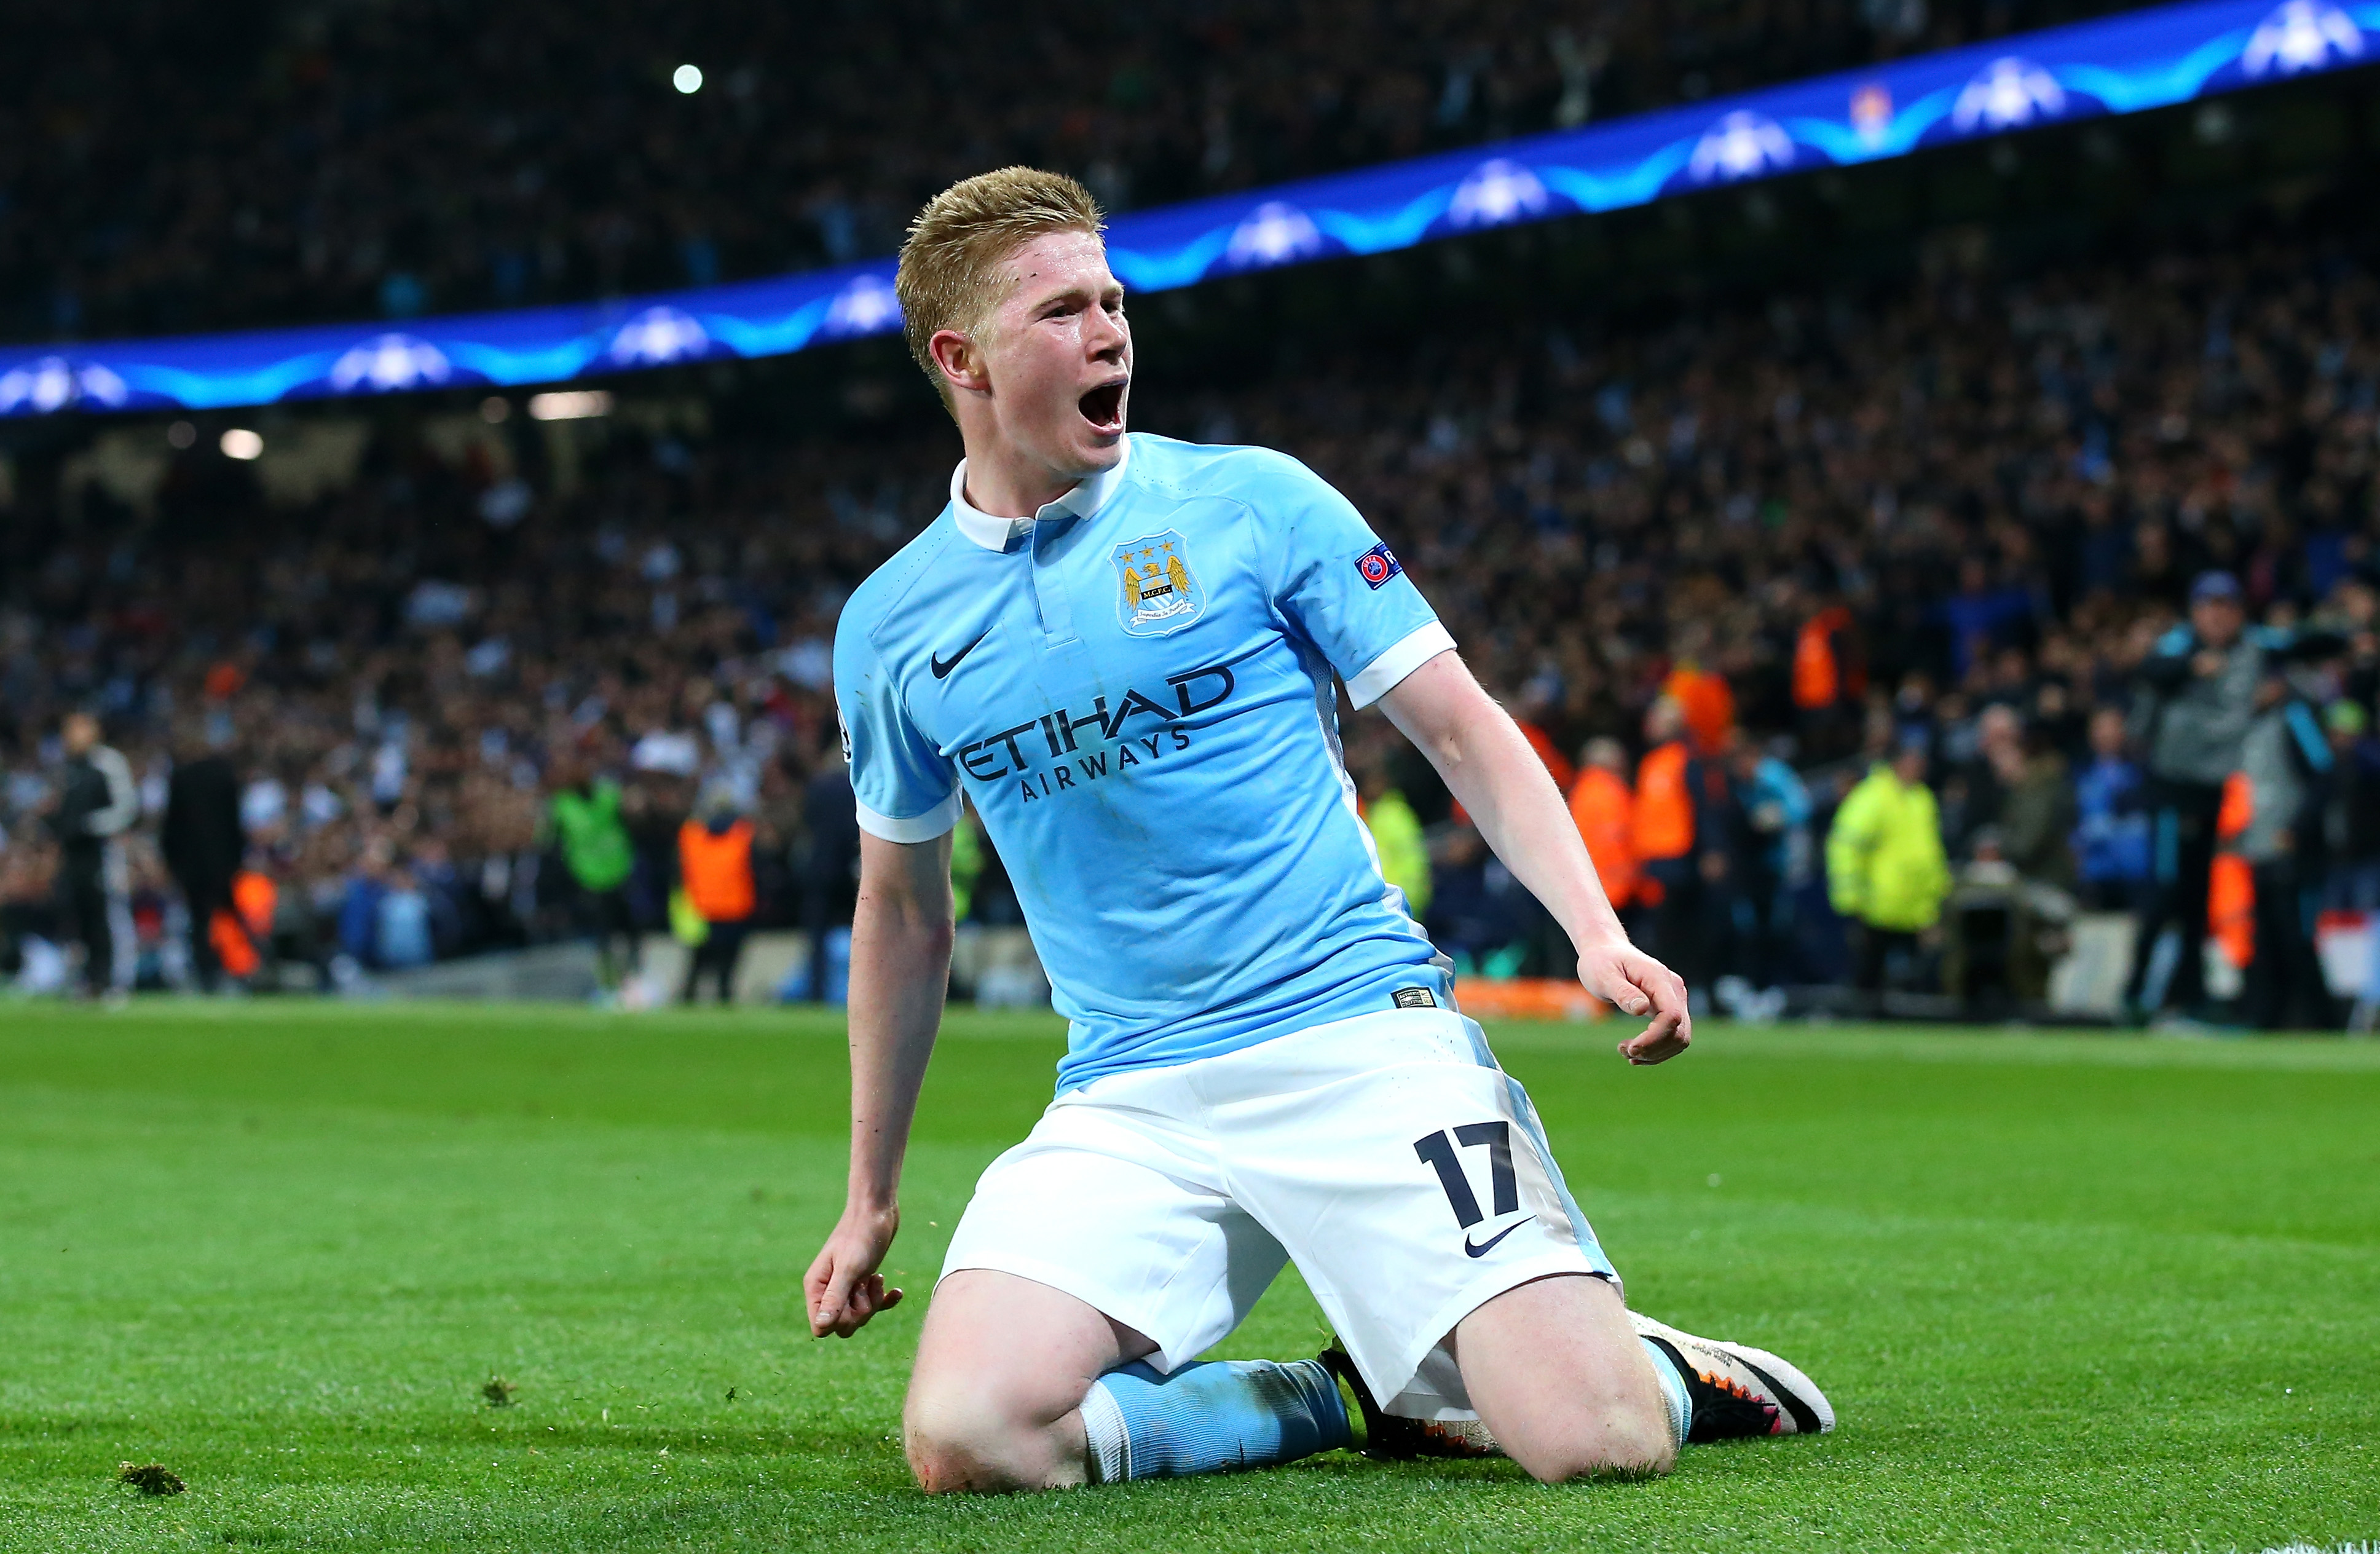 Manchester Derby | Guardiola goes one up on Mourinho as De Bruyne dazzles at Old Trafford